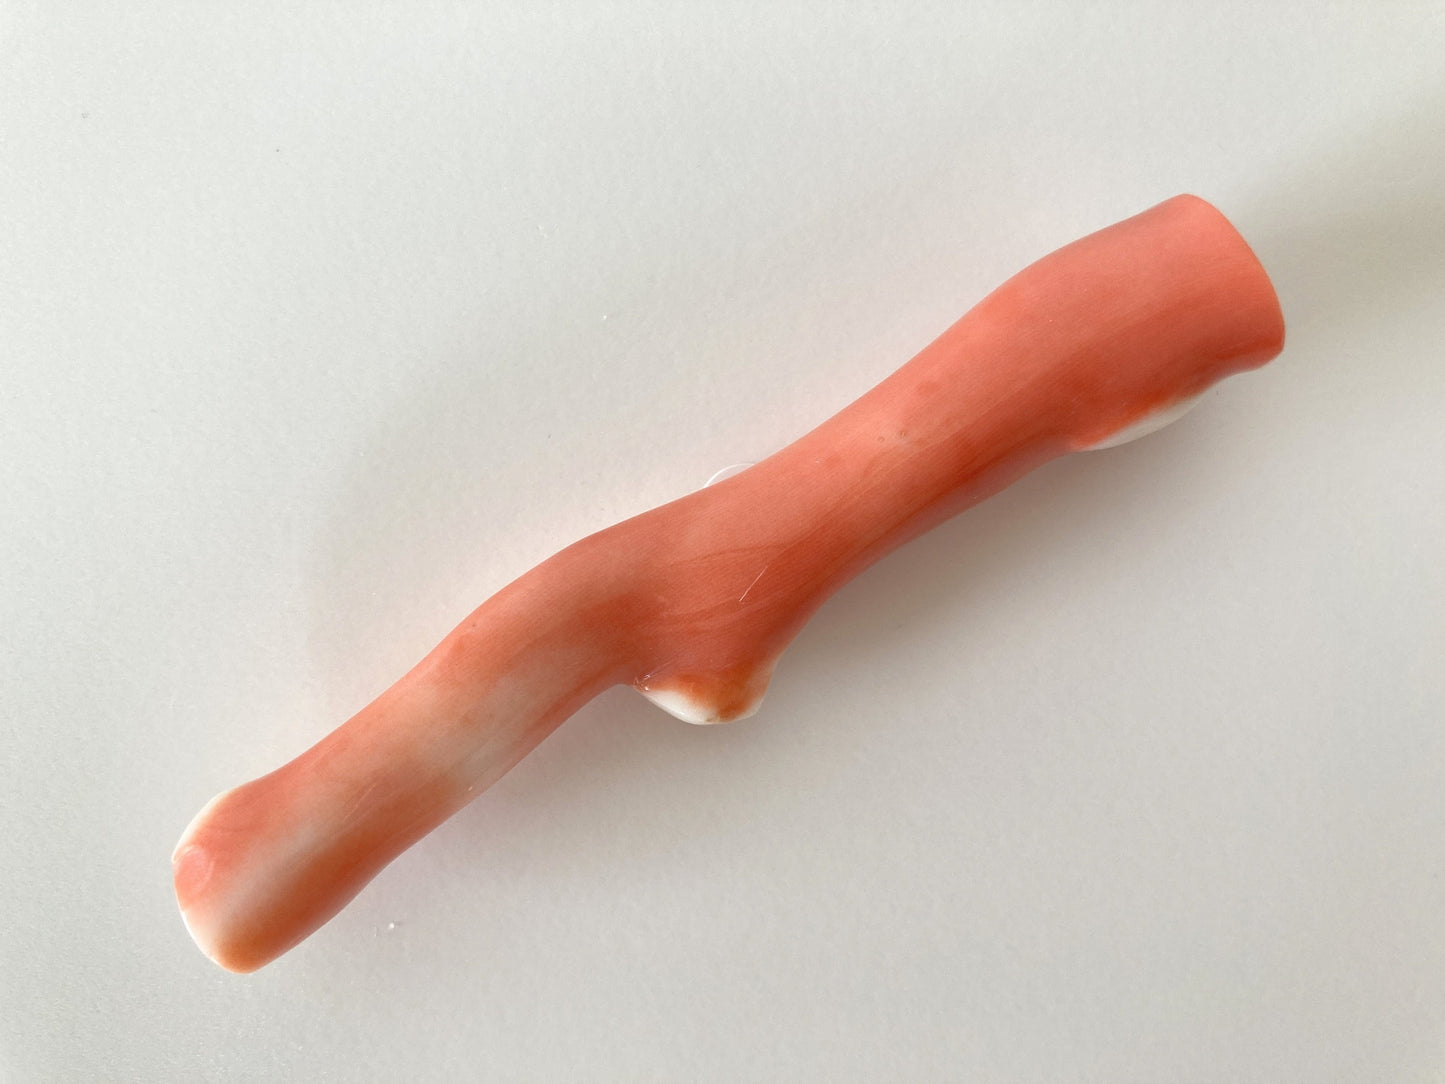 Coral branch 85mm, Japanese Momo Coral Branch, Natural Orange Color Coral Branch, Genuine Coral, For Jewelry making